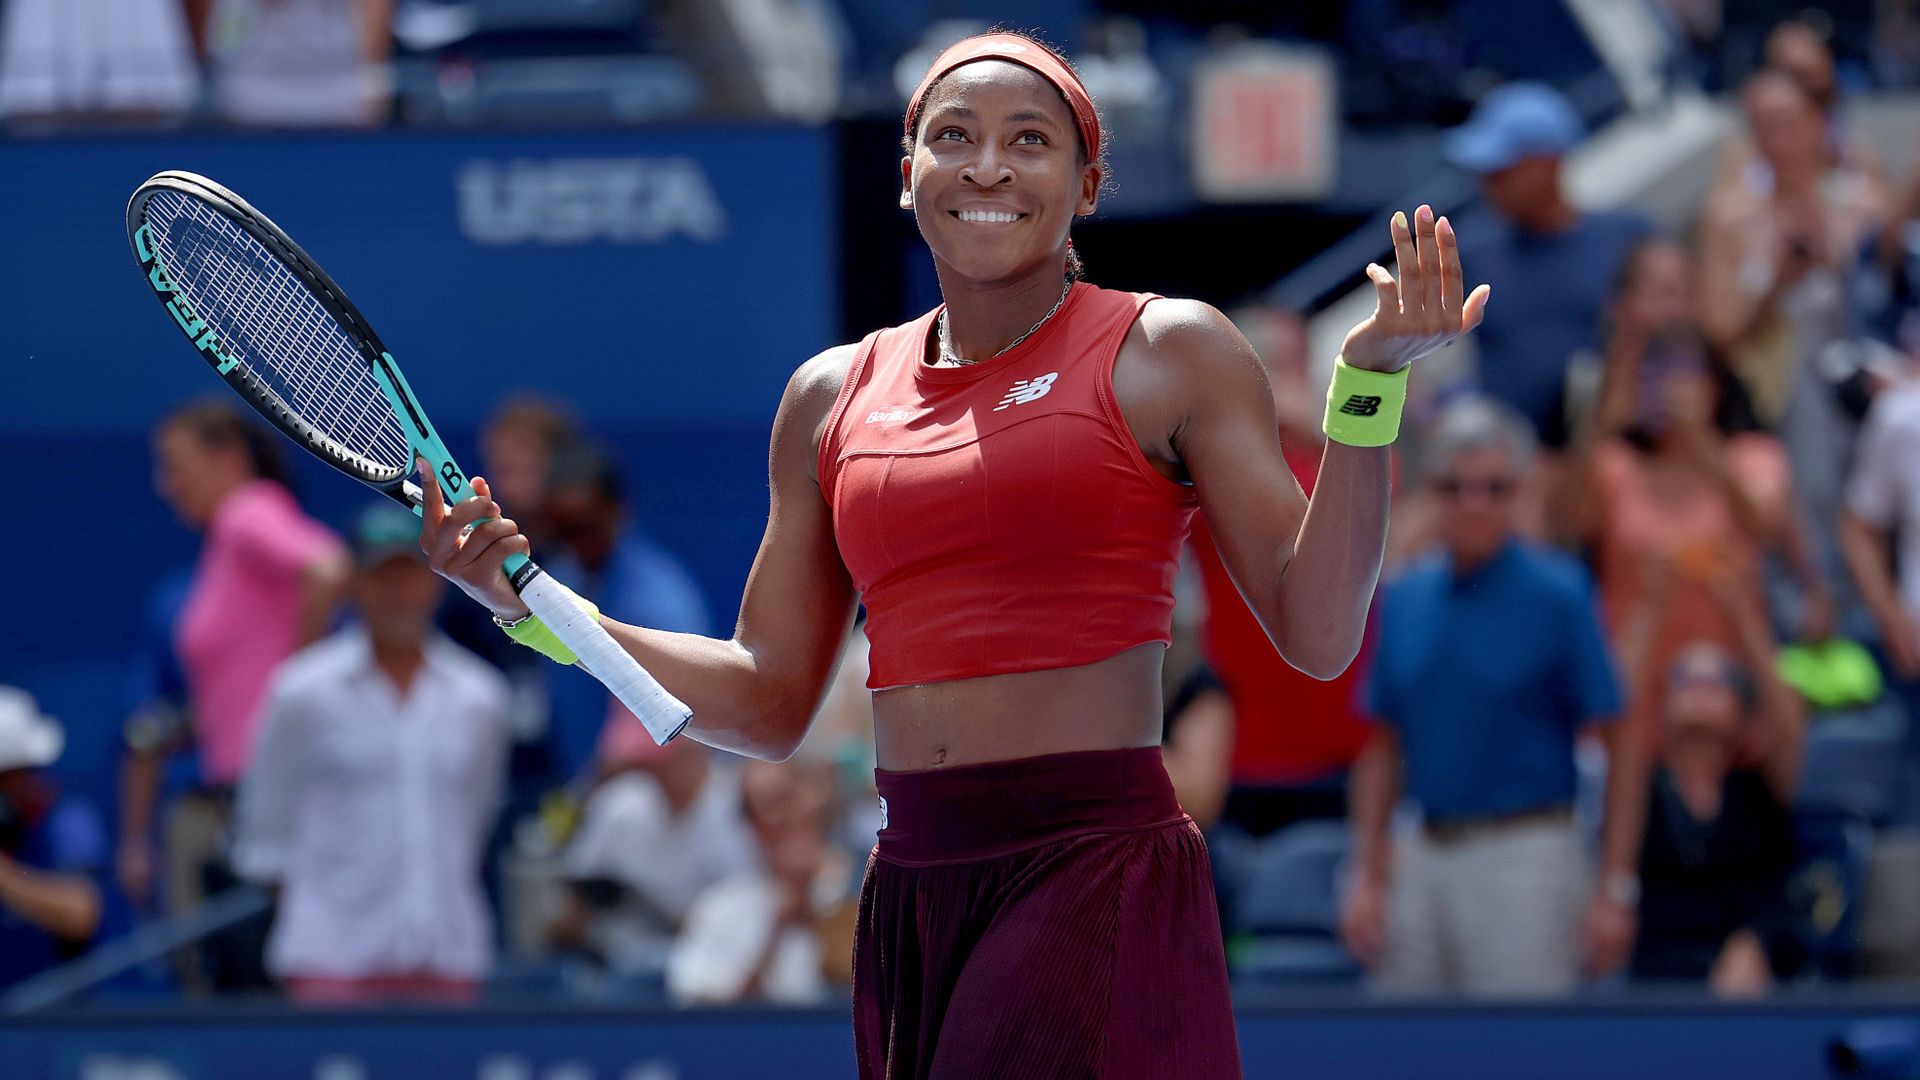 Gauff has the weight of America on her shoulders as she eyes US Open glory